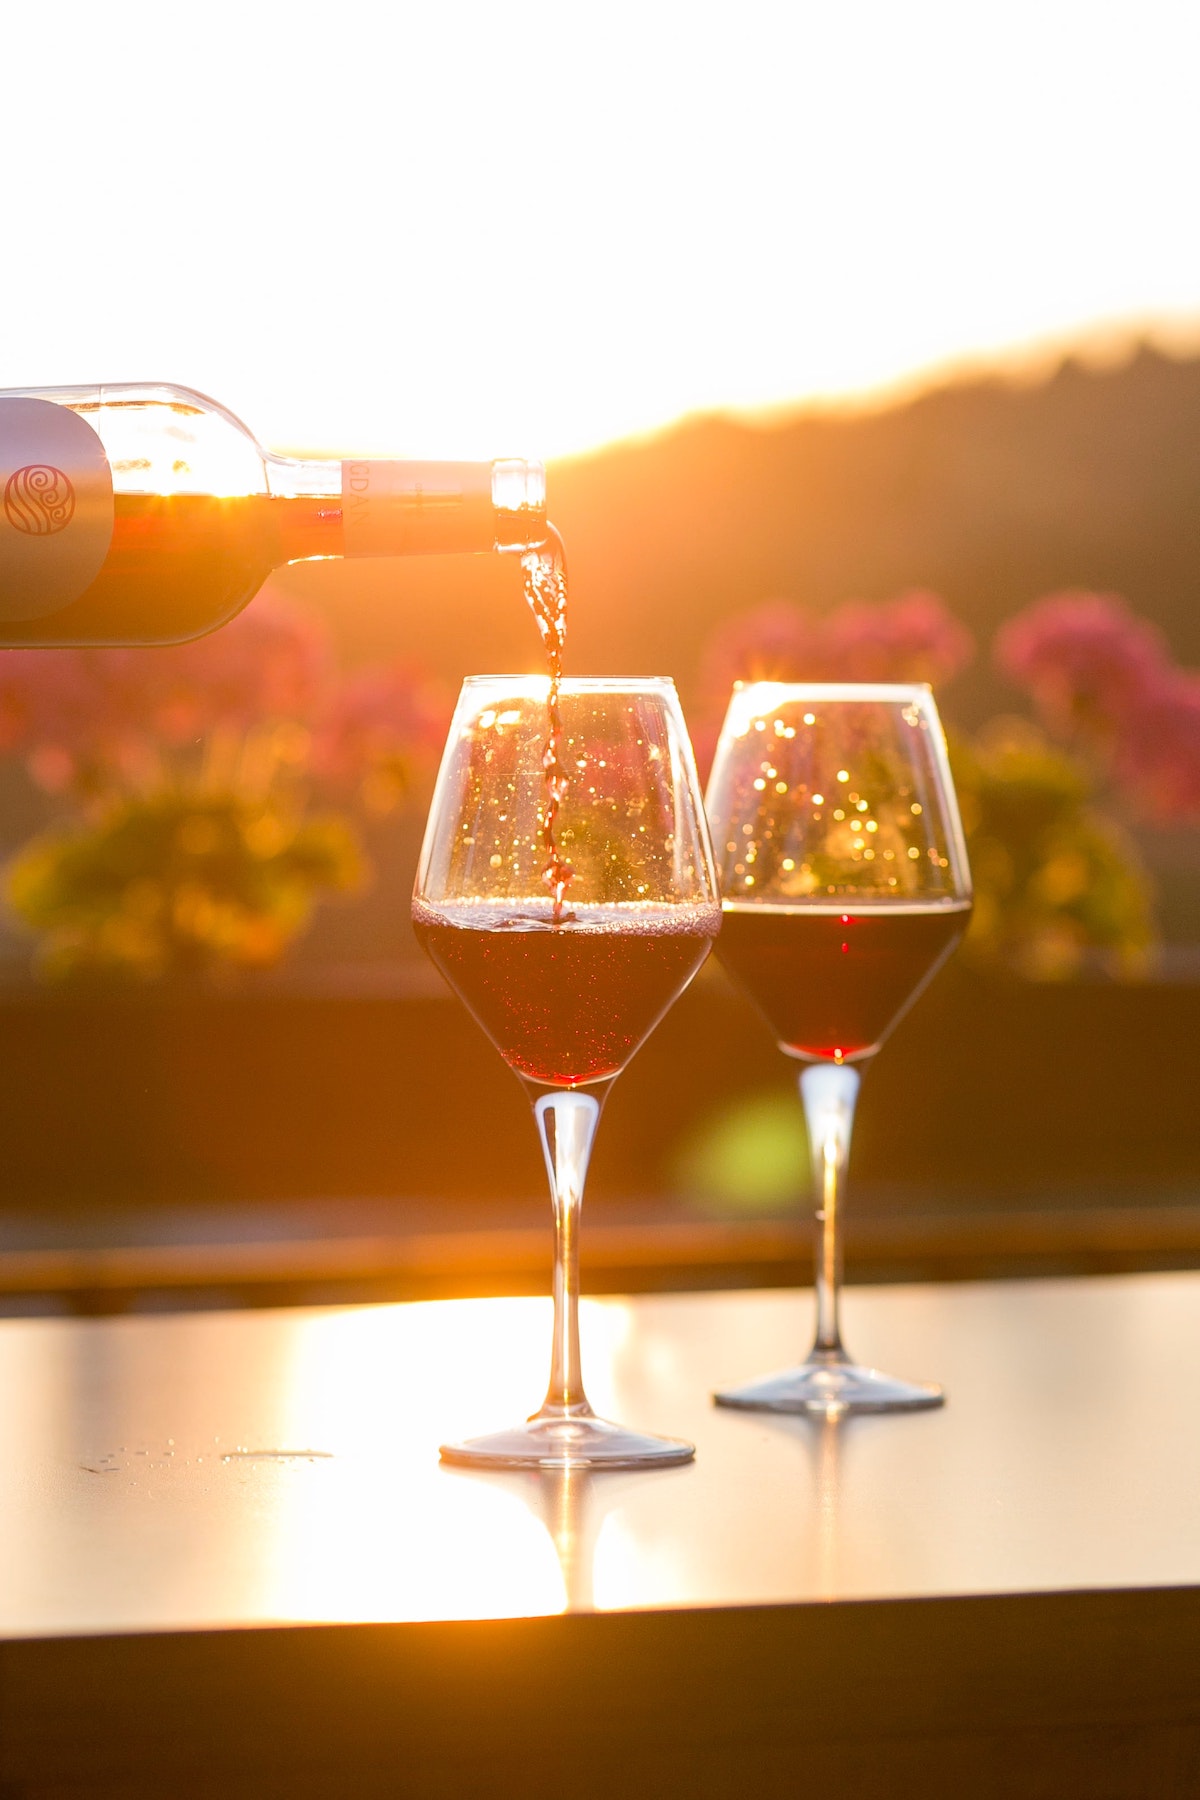 Two glasses of red wine being poured at sunset